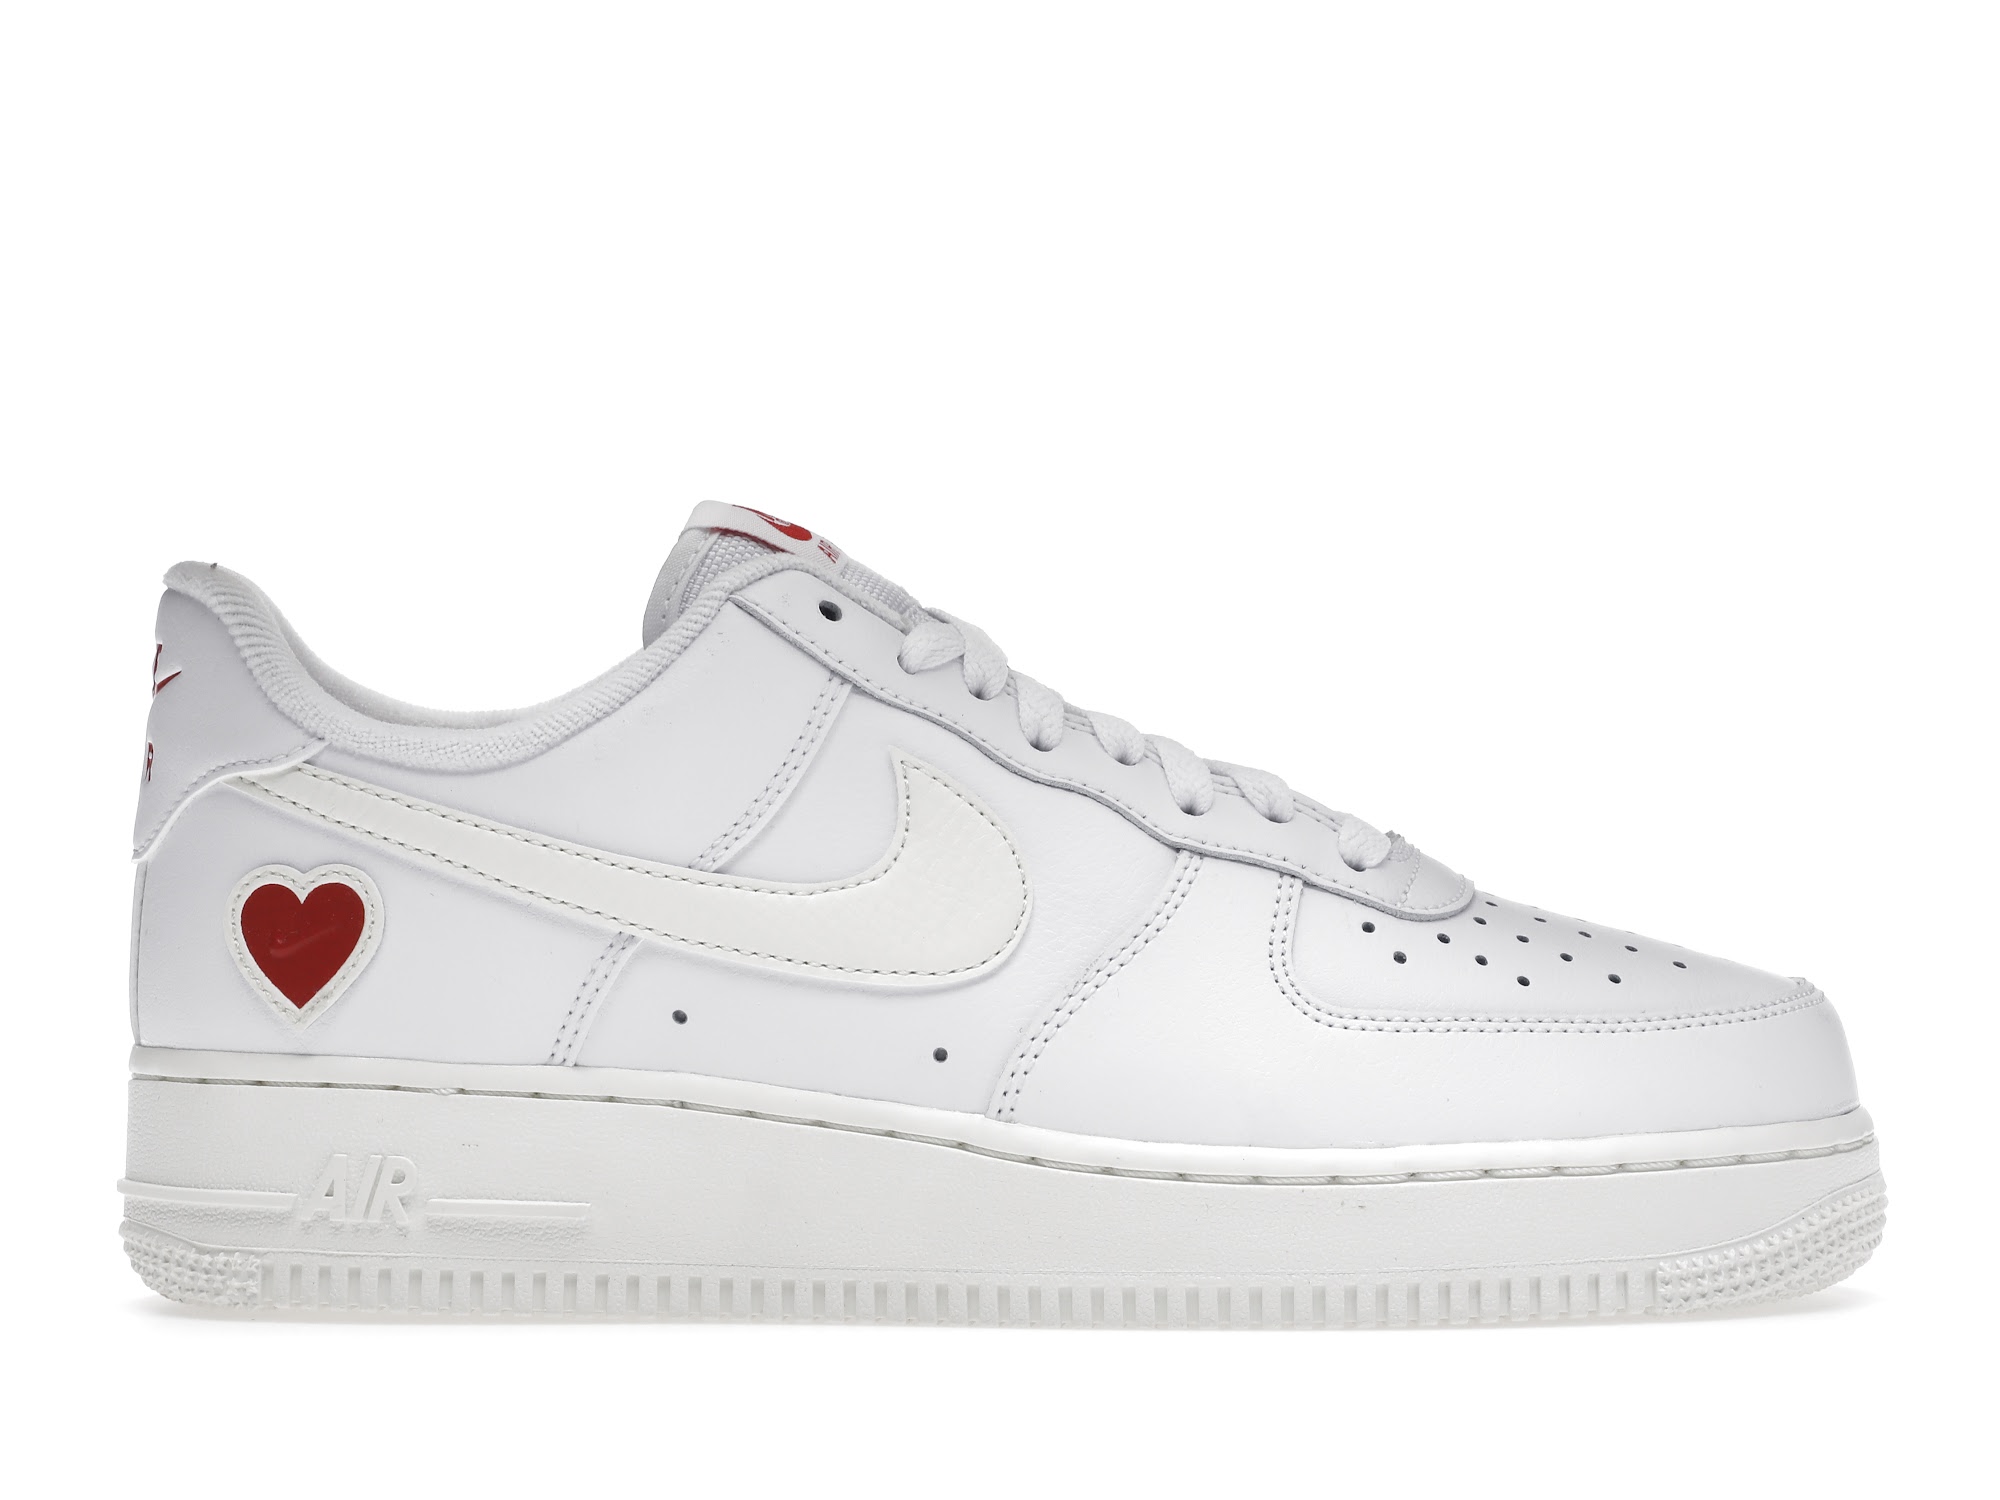 Nike Air Force 1 Low Valentine's Day (2021) メンズ - DD7117-100 - JP